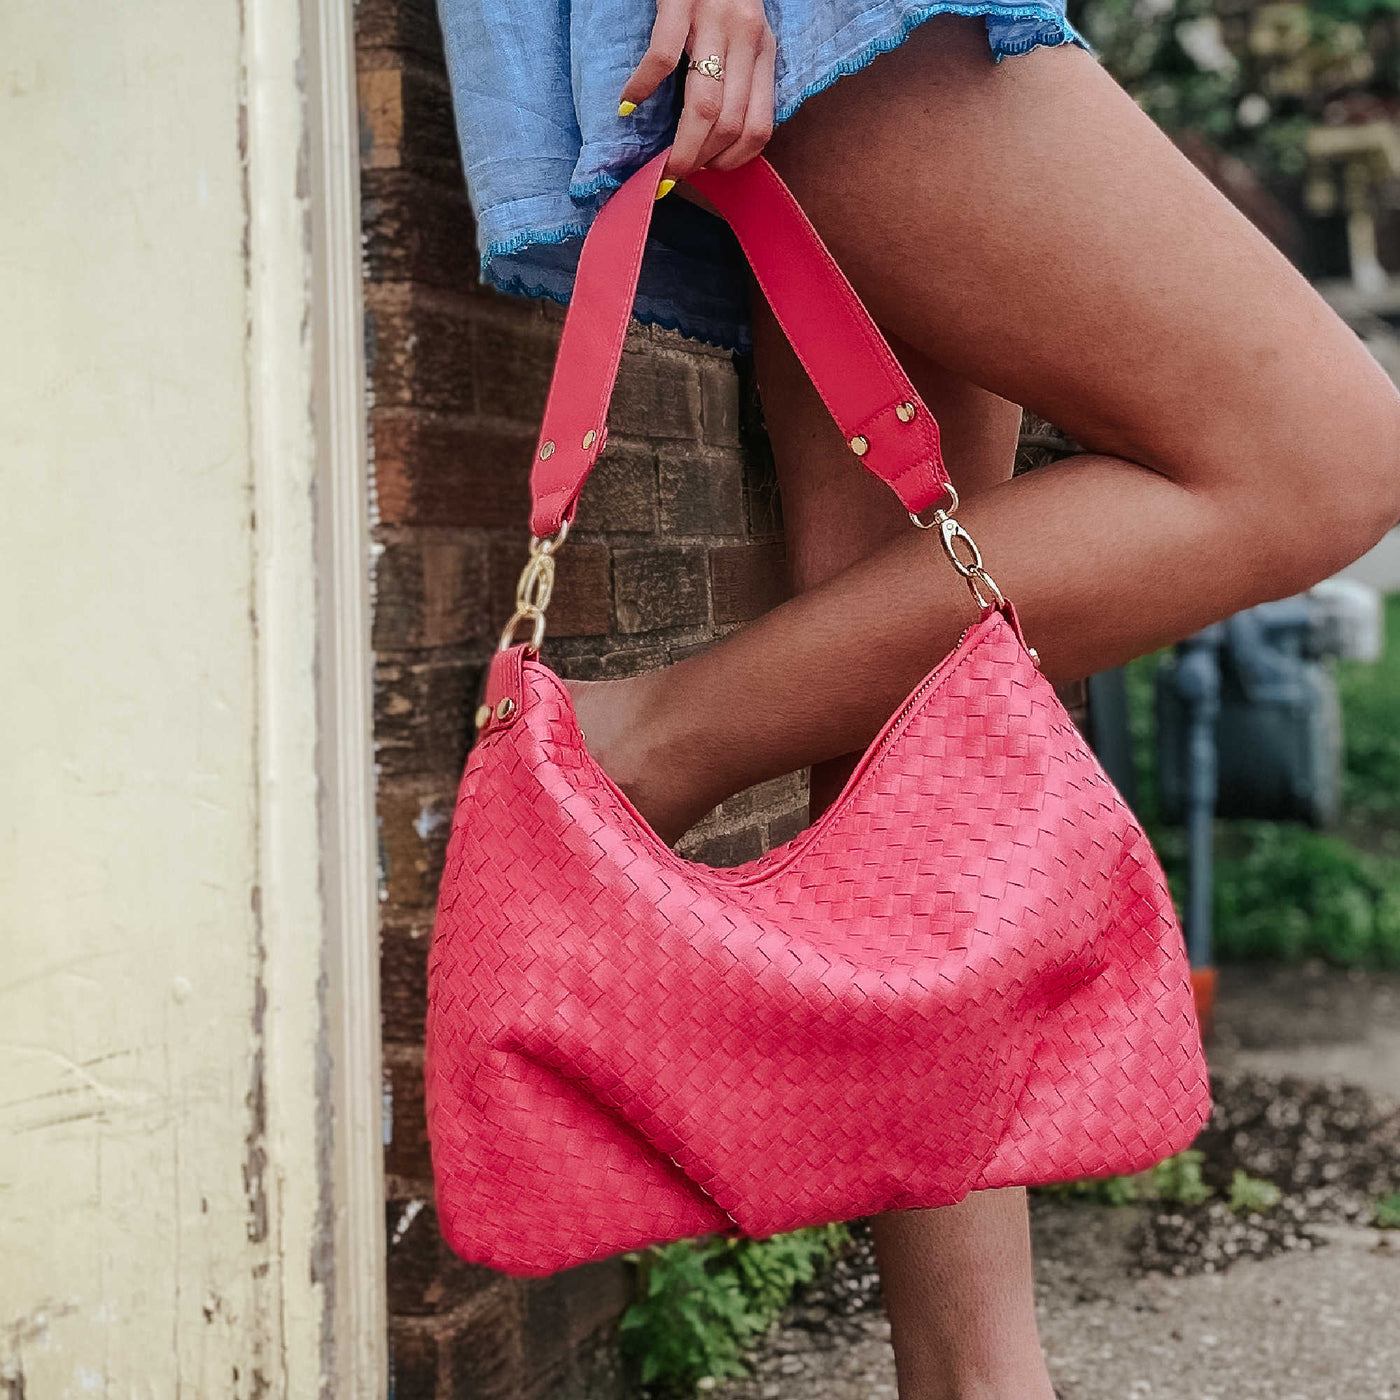 The Remi Small Hand Woven Vegan Leather Crossbody + Shoulder Bag